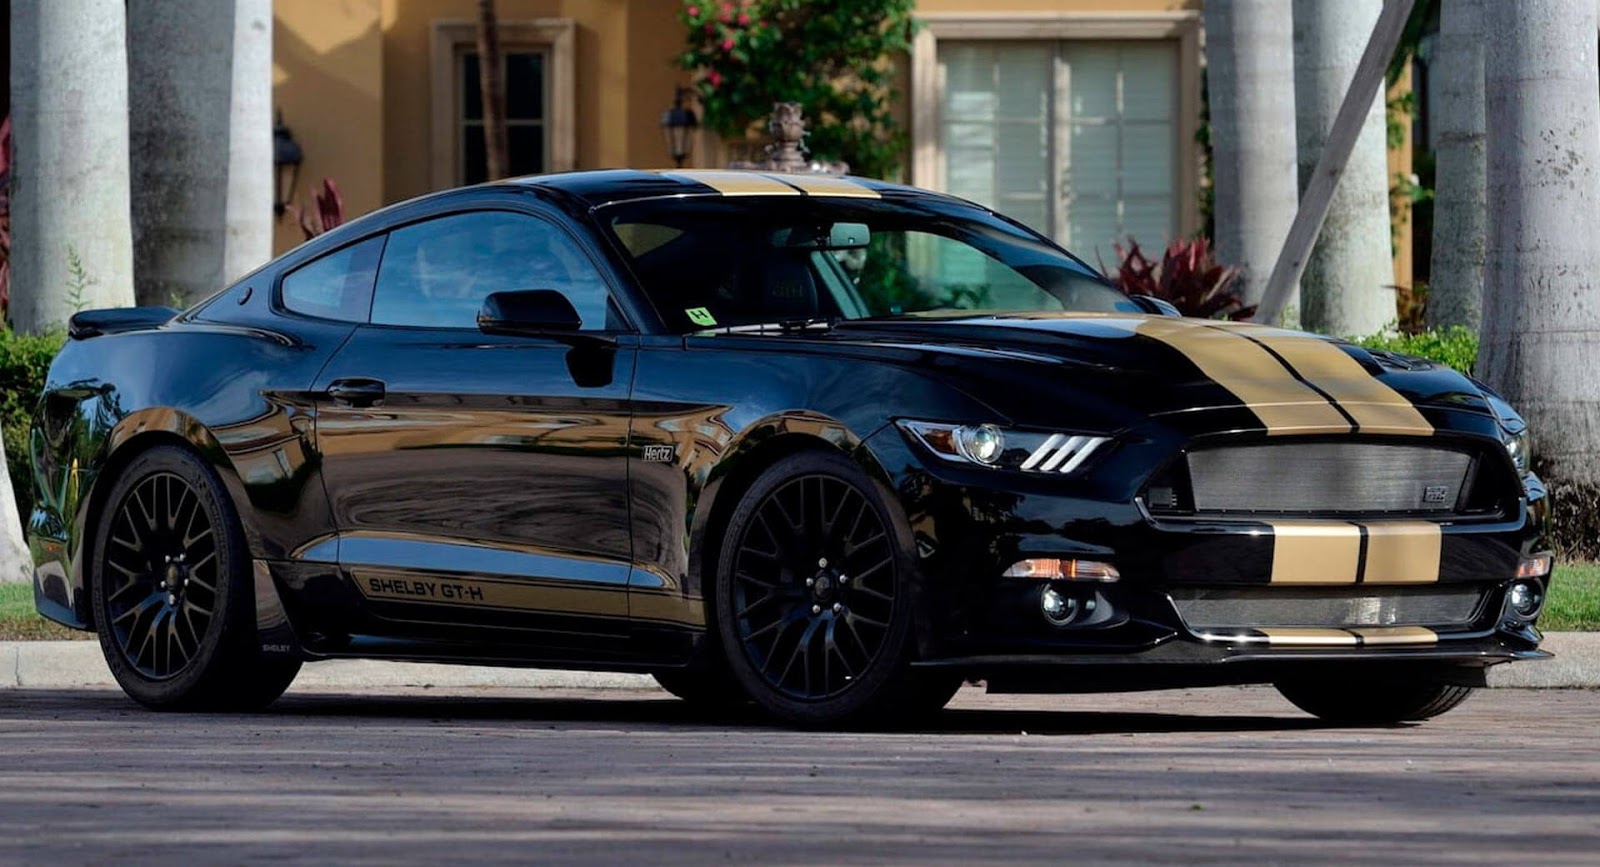 Four Hertz Mustangs Going Up For Auction Next Month | Carscoops